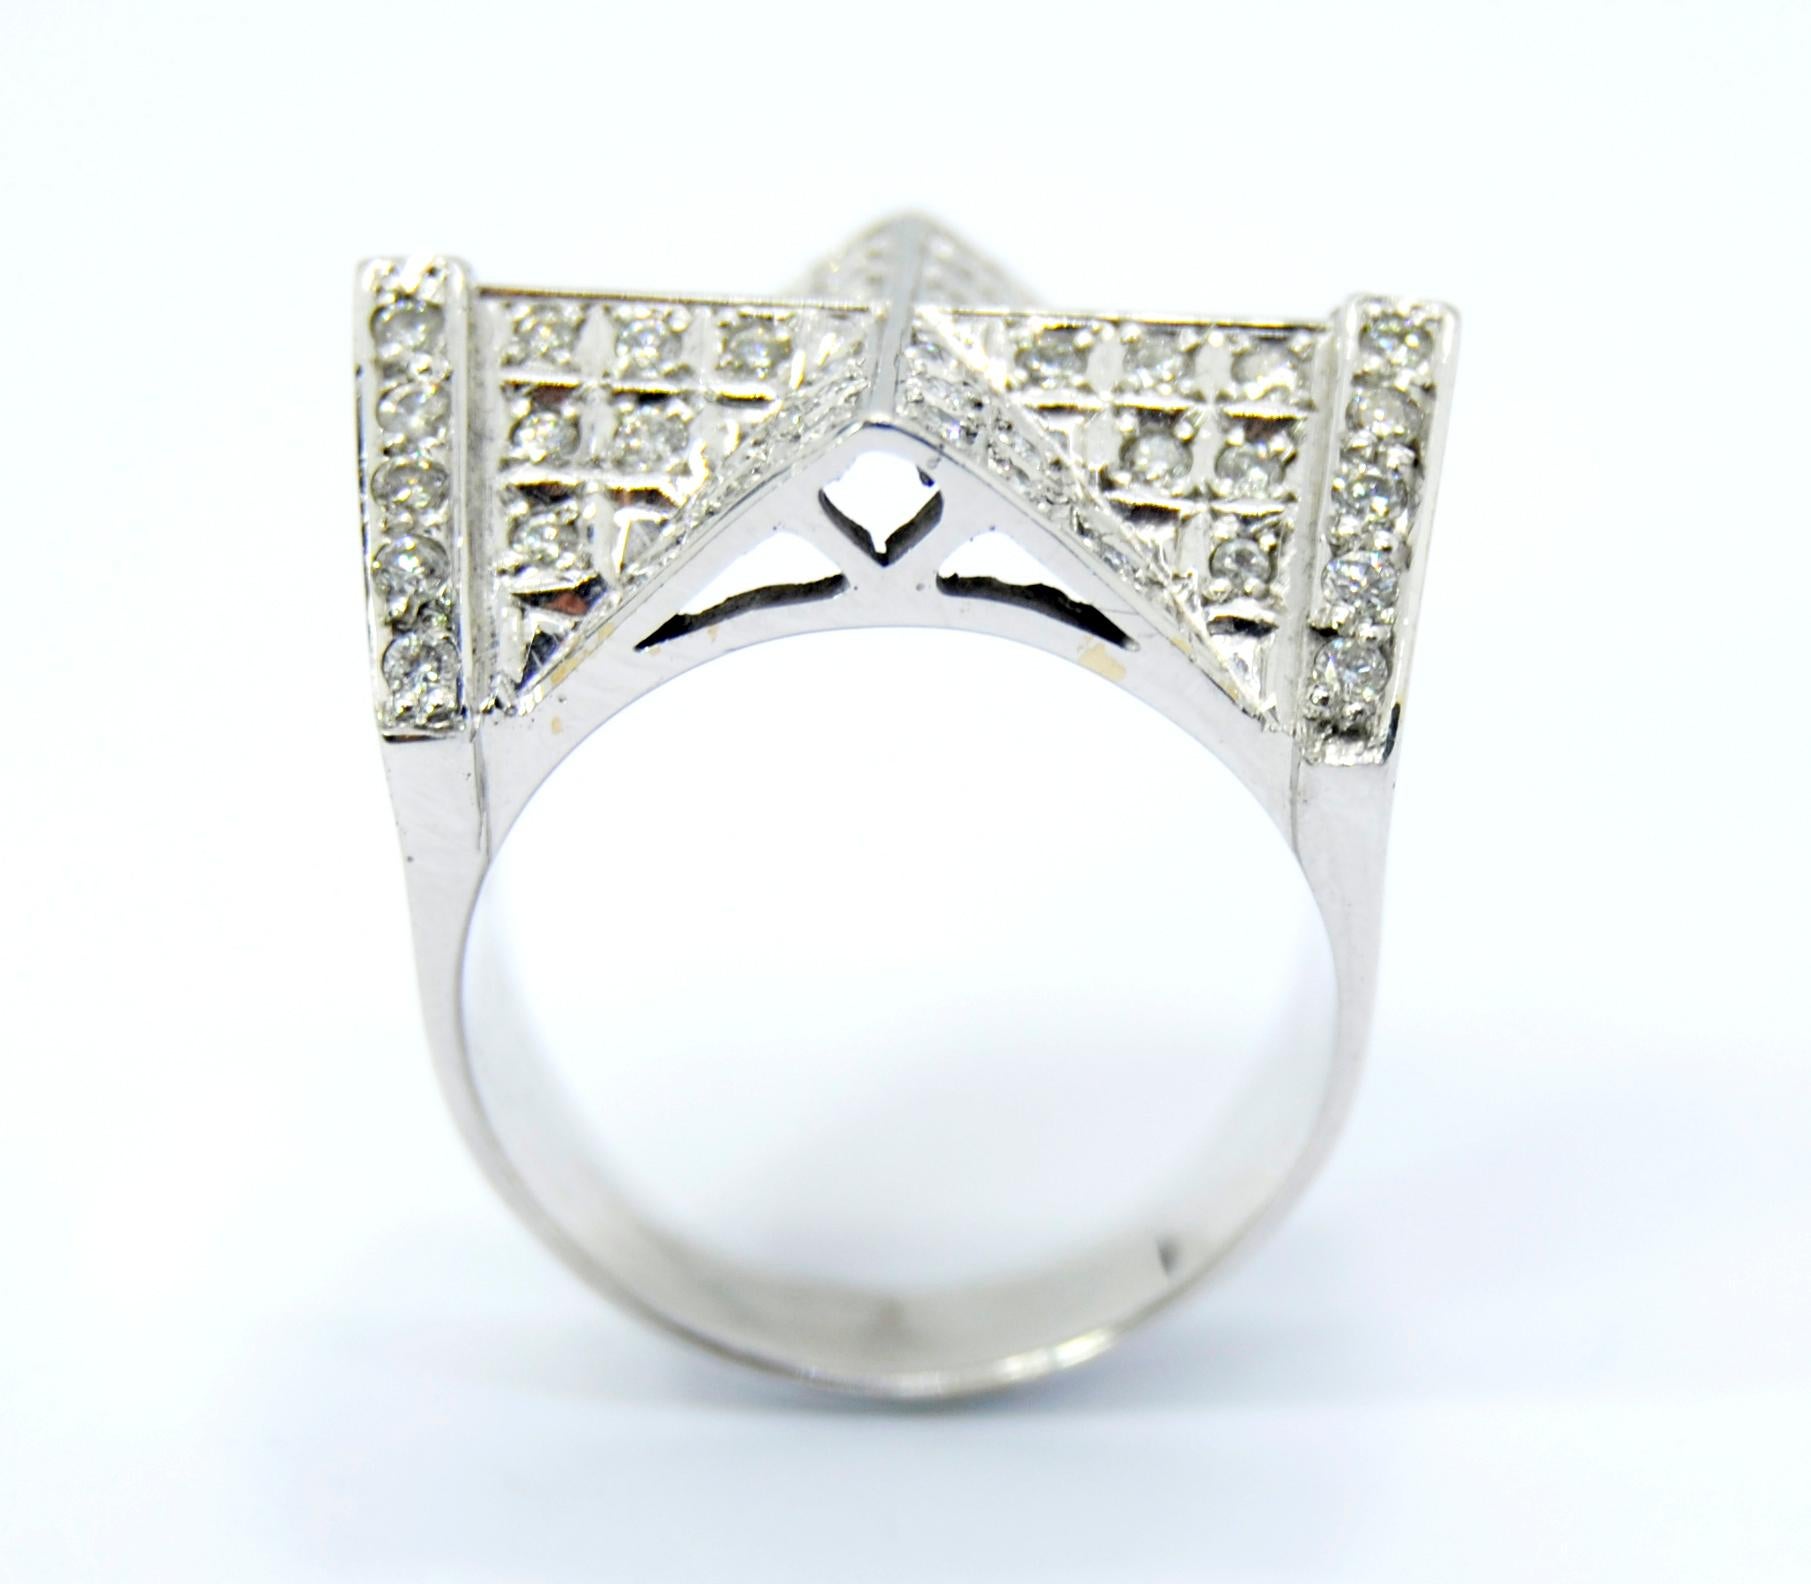 Cathedral Ring in 18 Karat White Gold and Diamonds
These collection is inspired in classicism with architectural mountings  and  vibrant and colorful diamonds.
This ring has total of 0.90ct of round diamonds
Size 16 but can be adjusted
Ring Weight